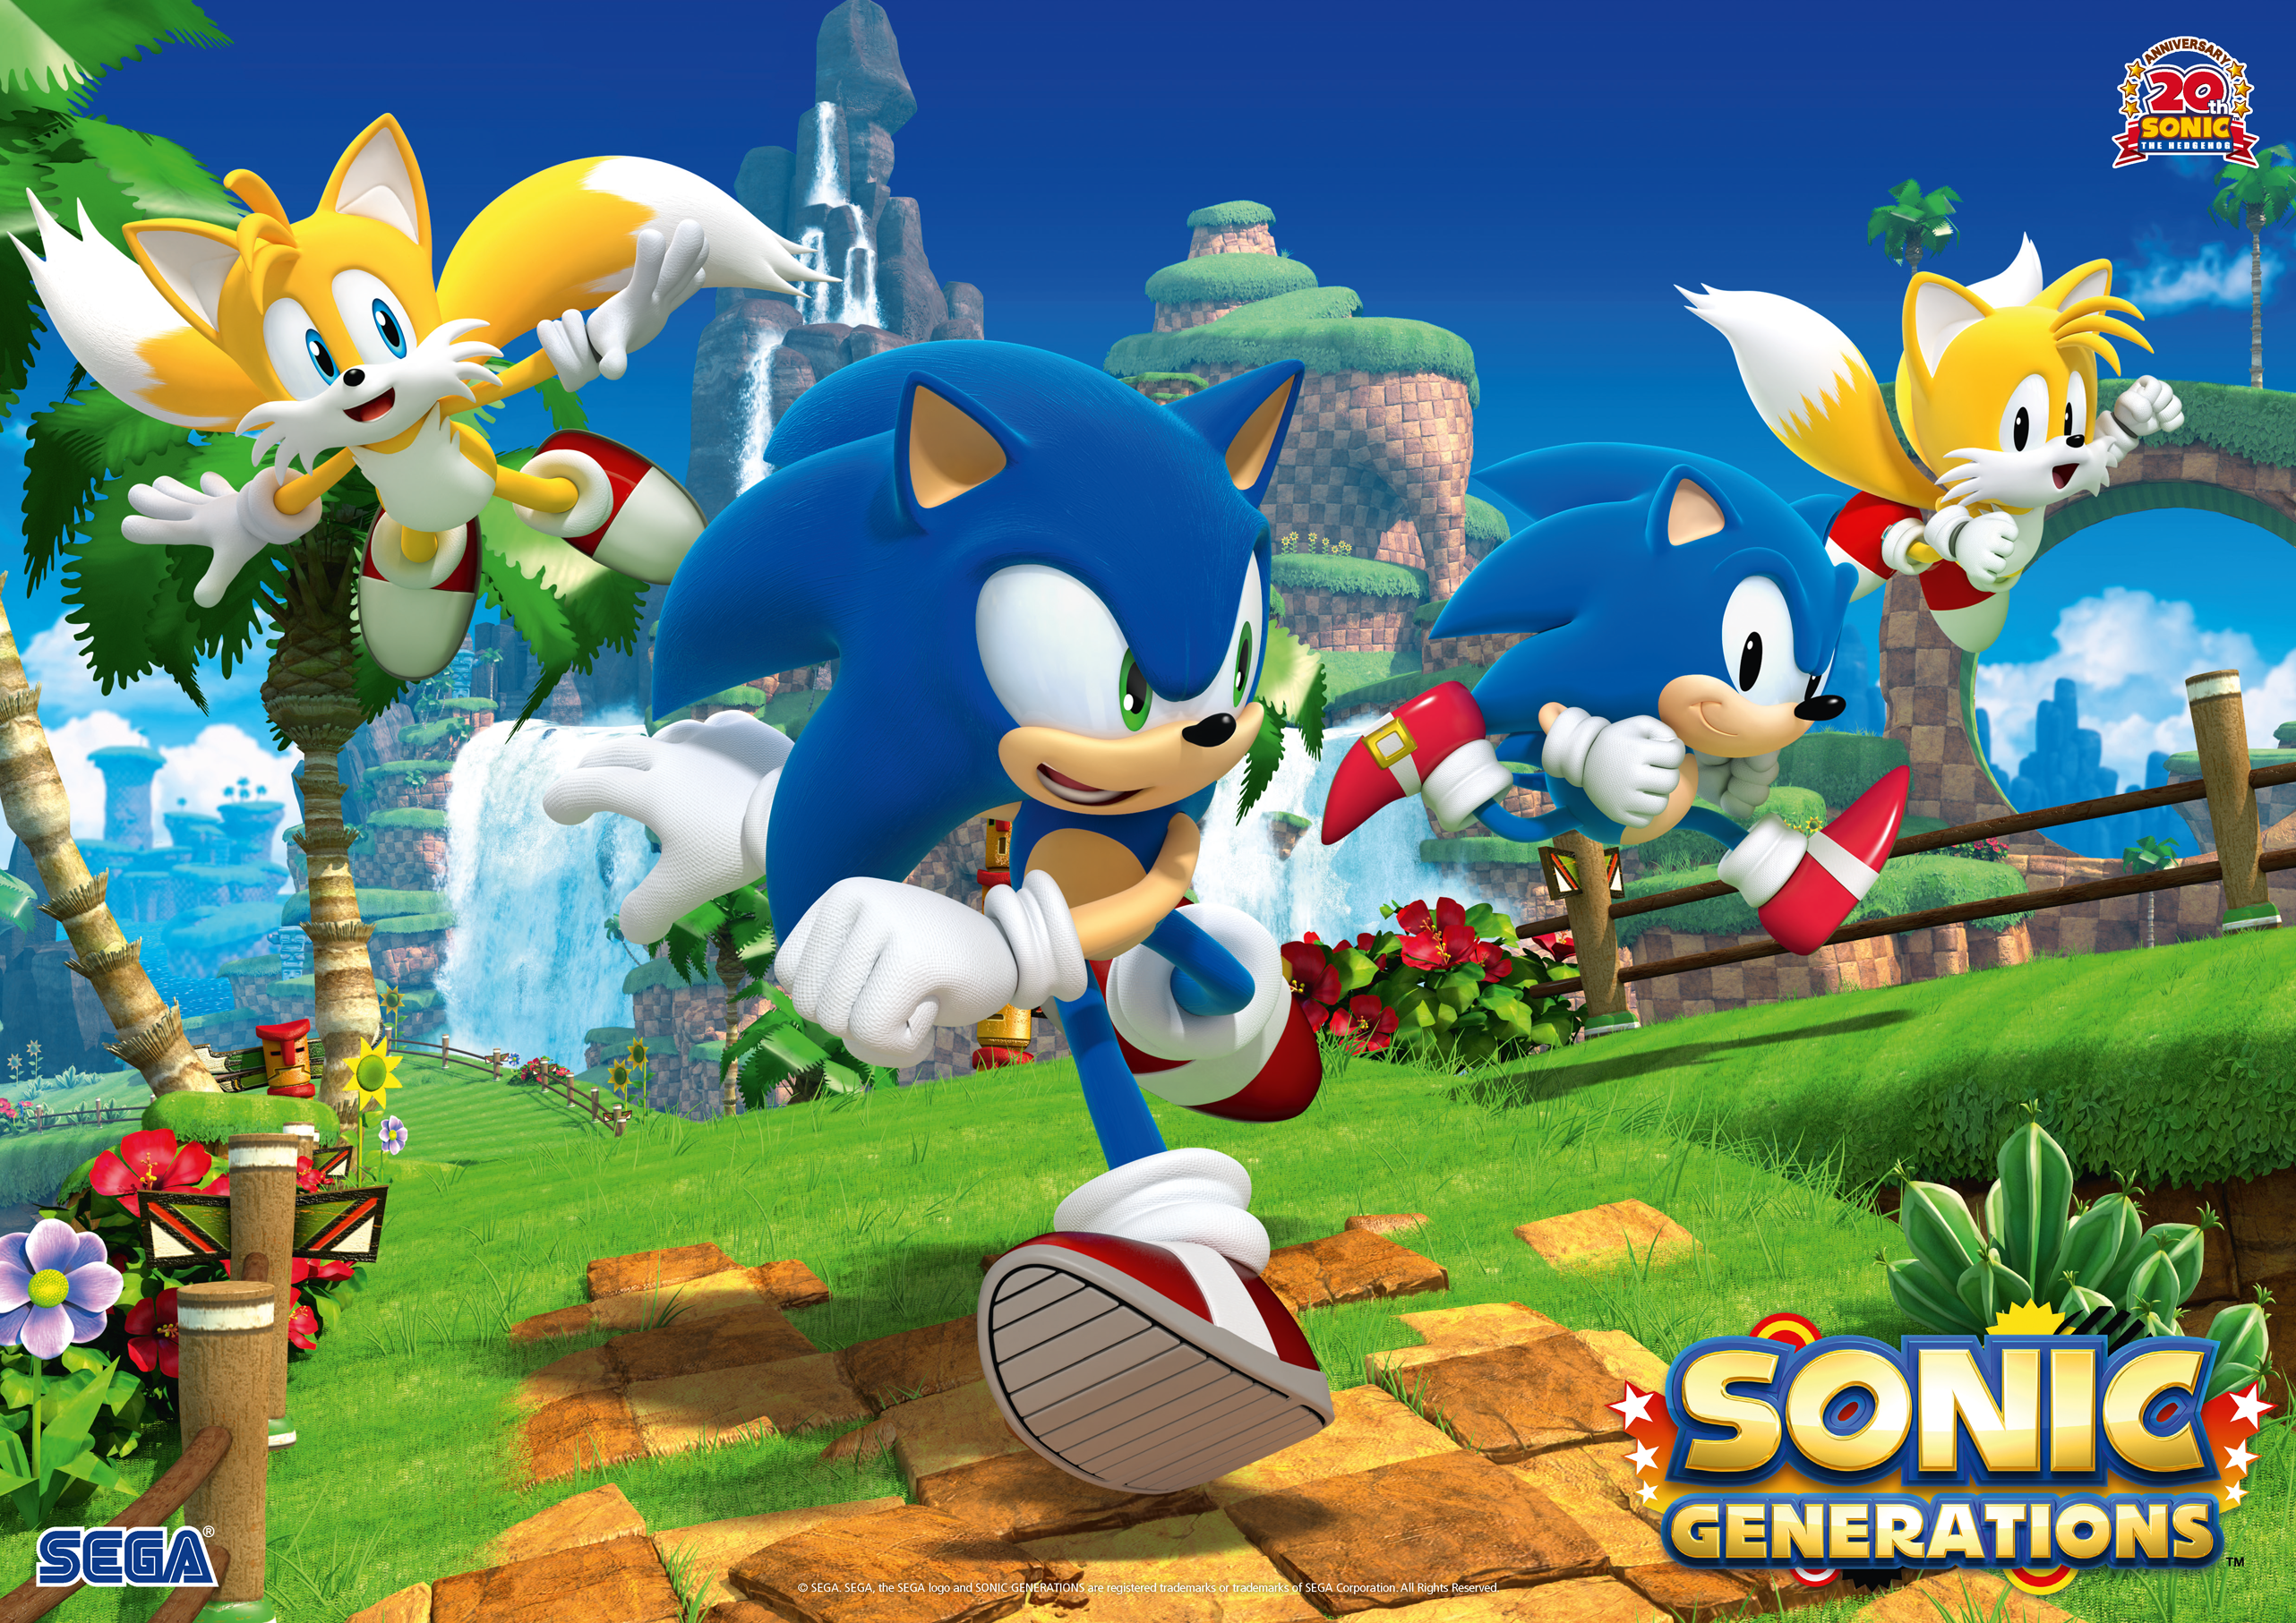 Xbox March 2020 Games with Gold Includes Sonic Generations and More